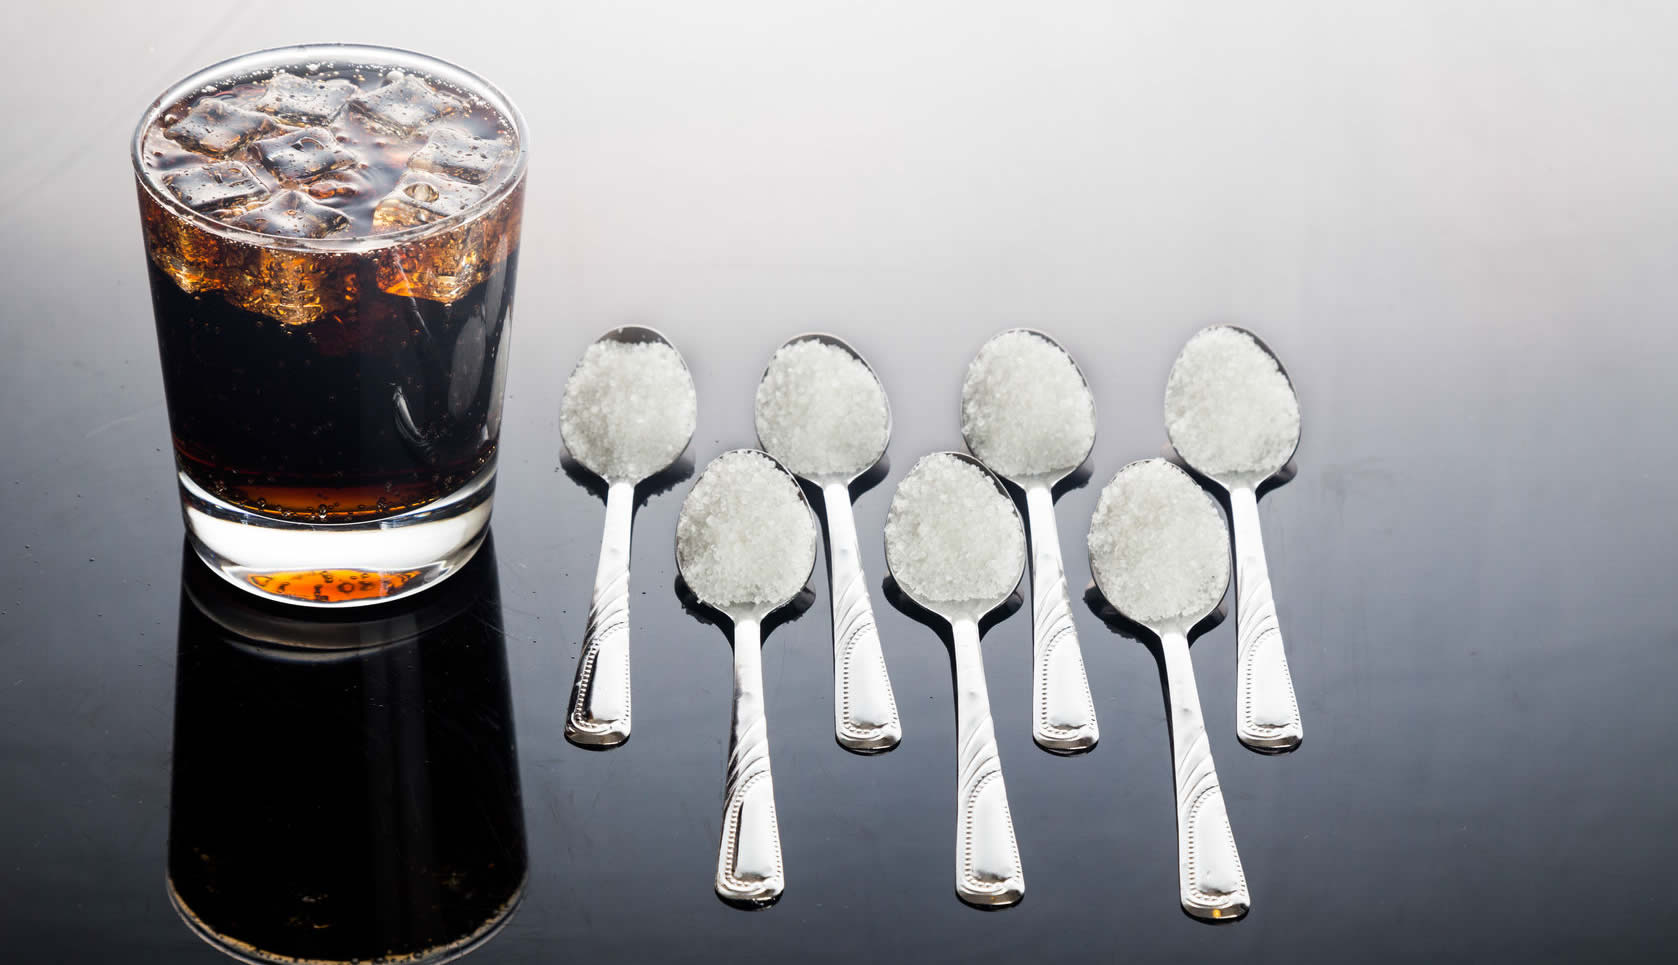 Soft drink and 5 spoons of sugar.